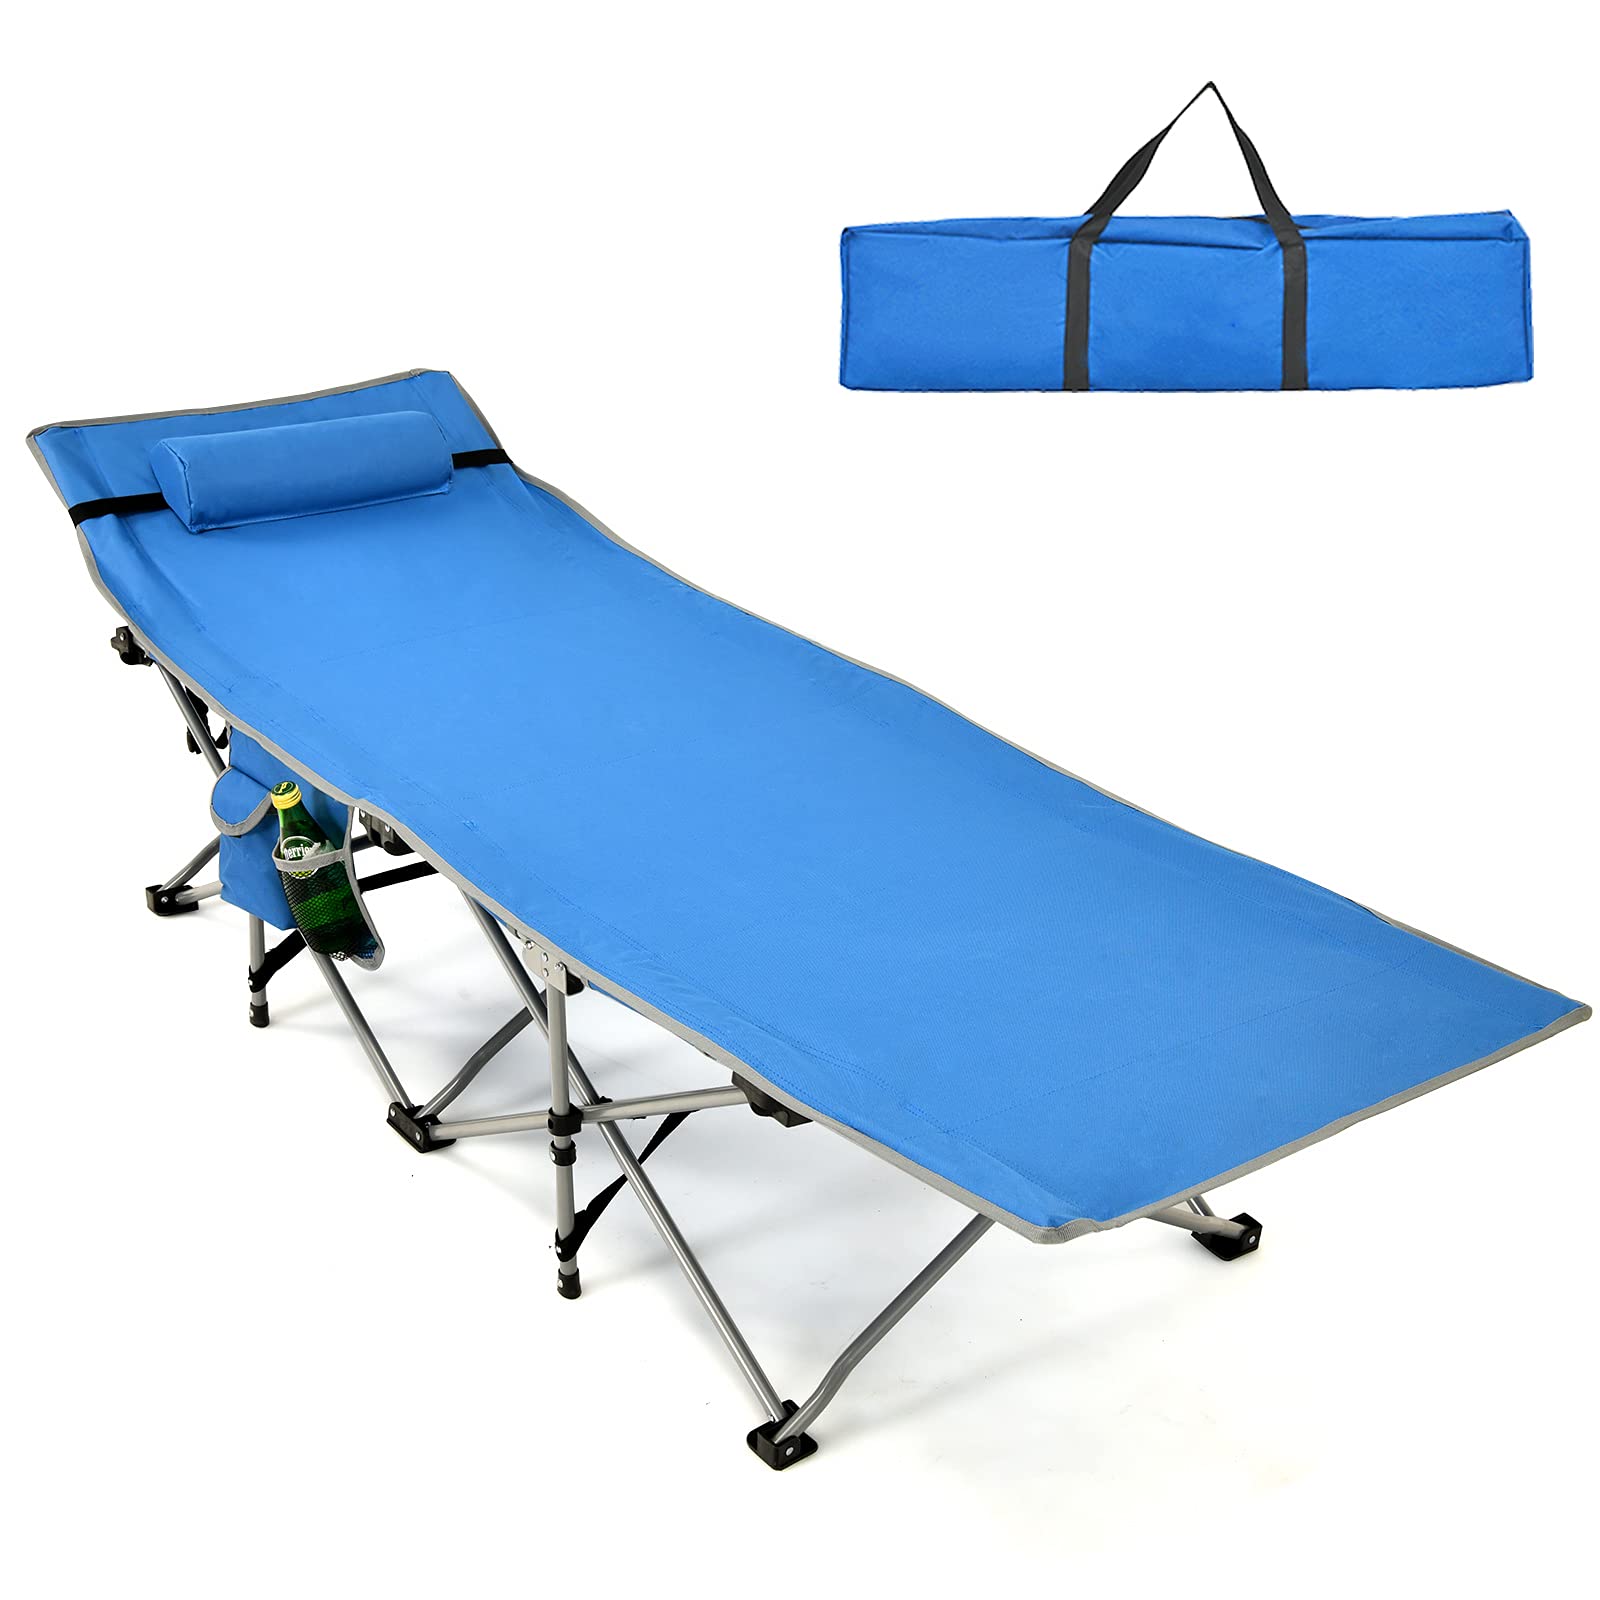 Folding Camping Cot, Heavy-Duty Comfortable Cot Bed for Adults Kids